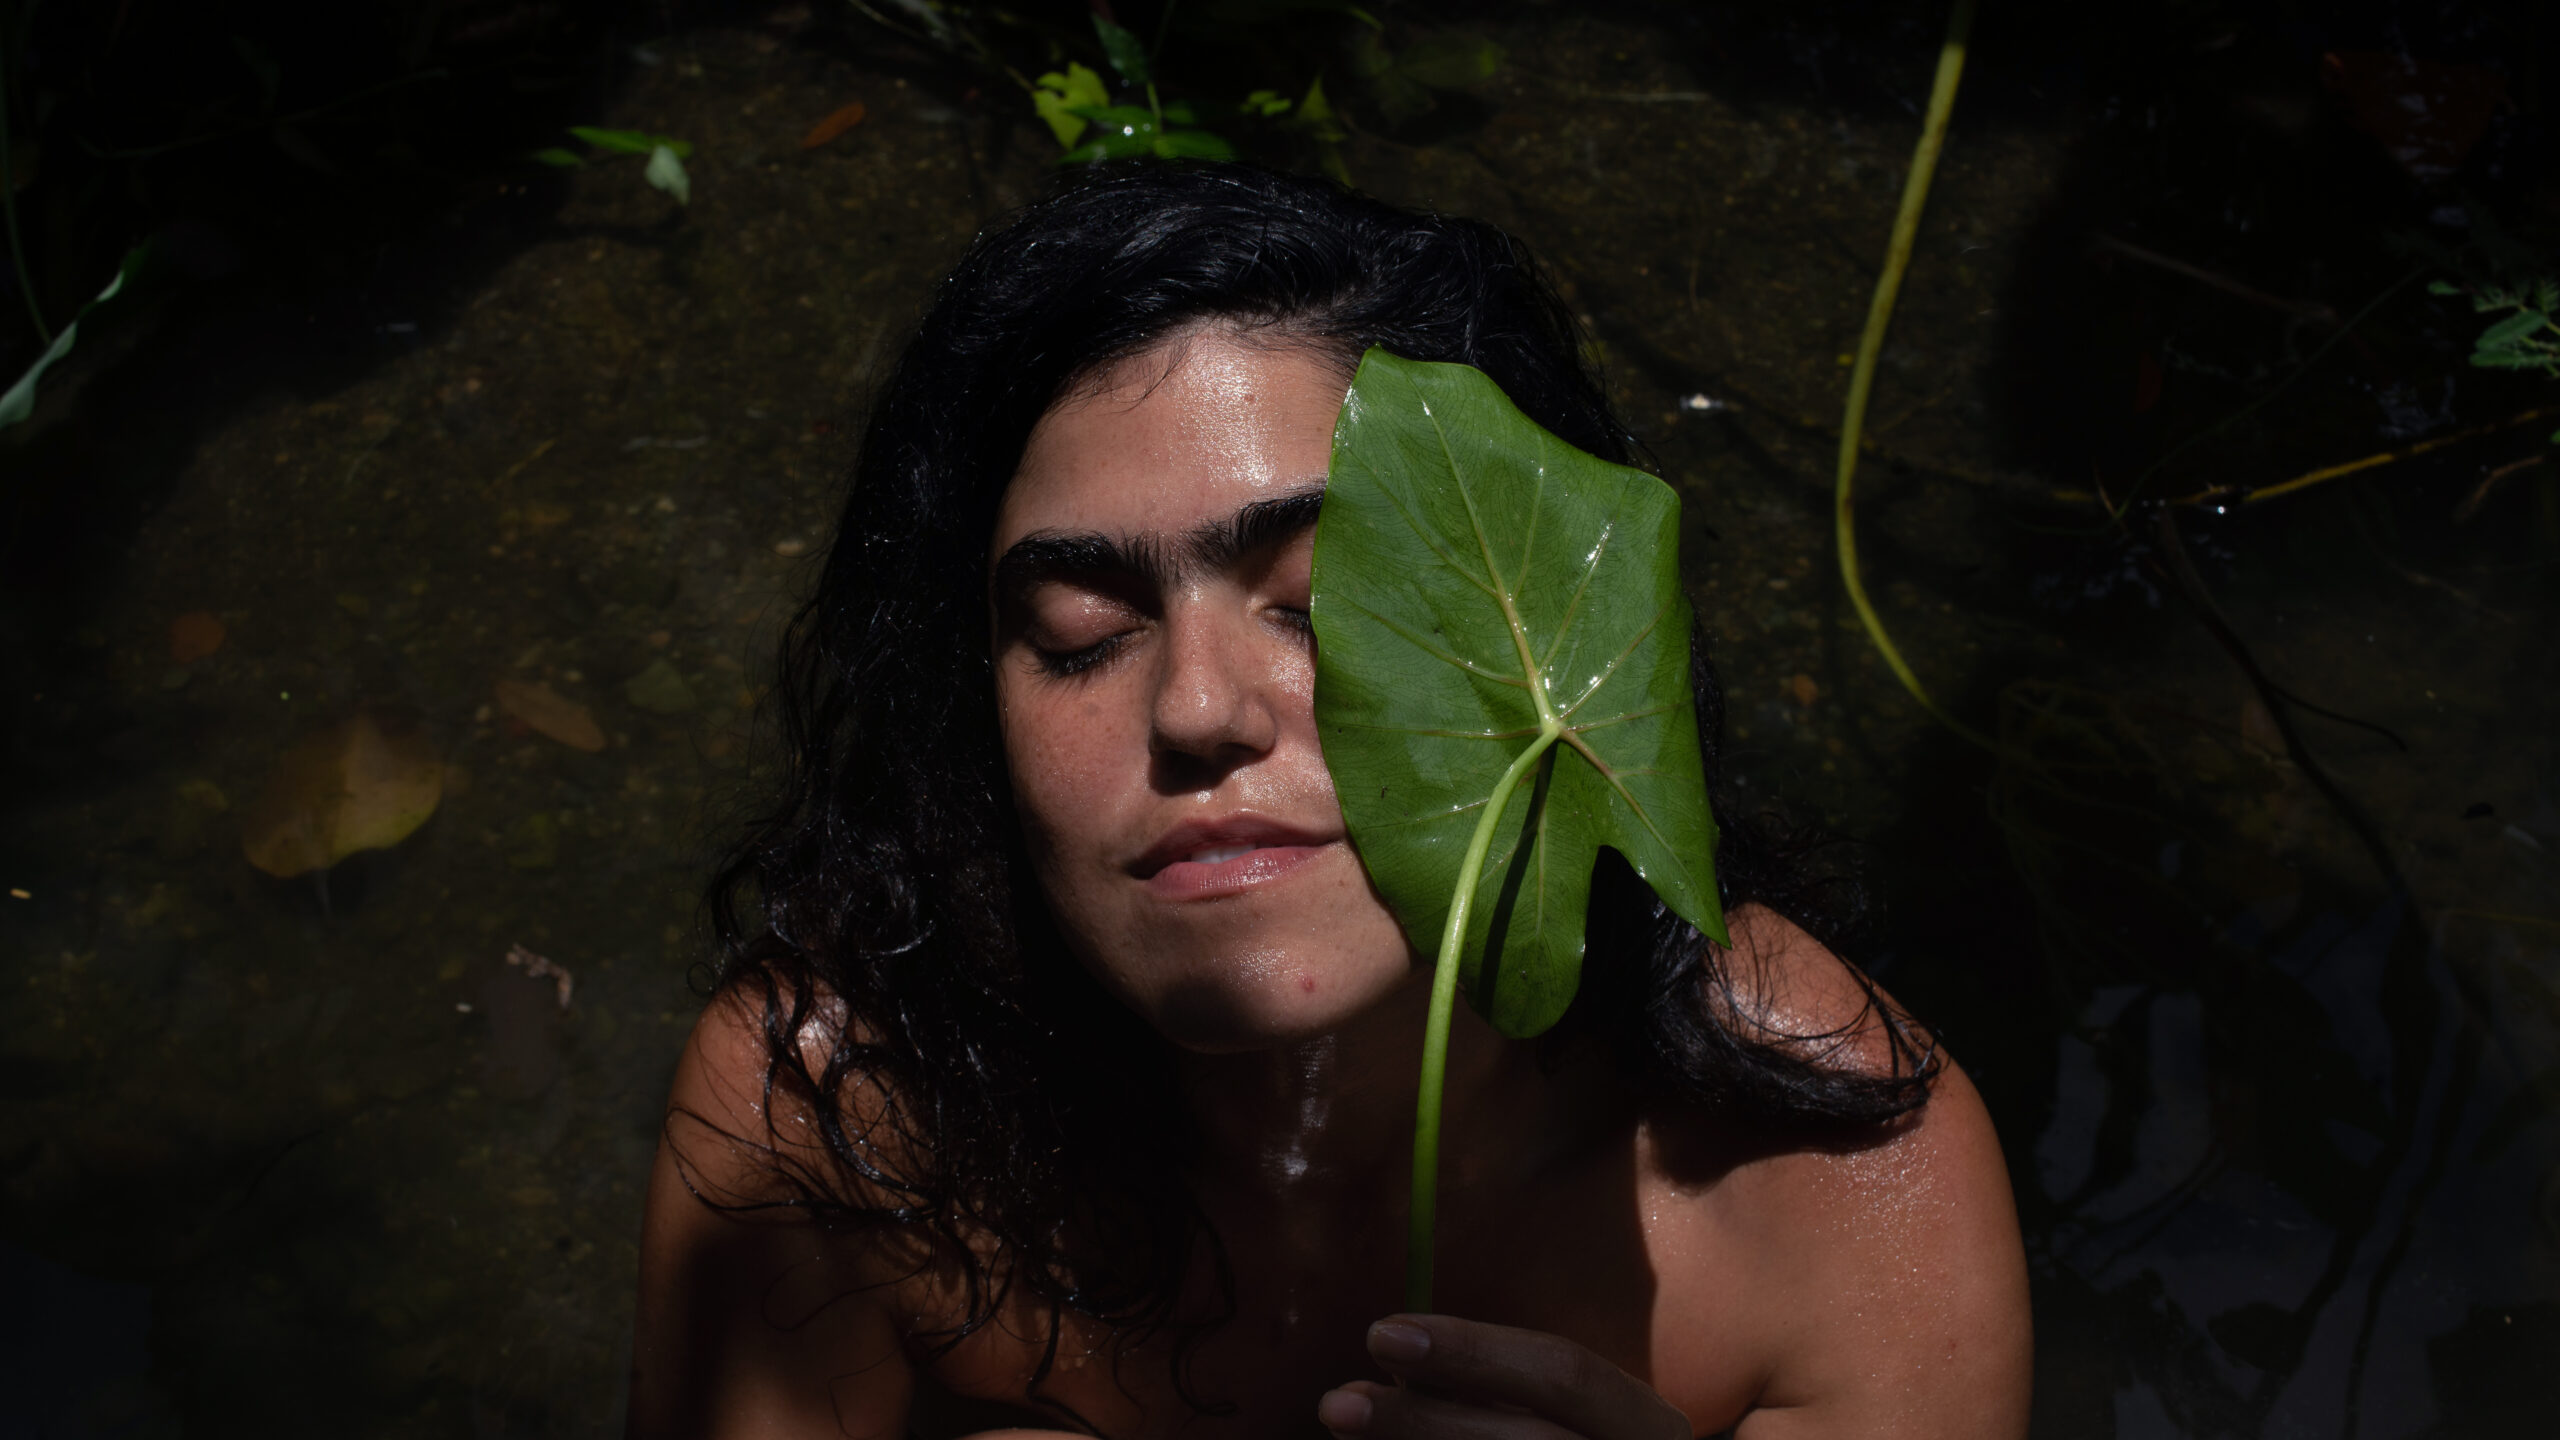 Person with long dark hair closes their eyes with sun on their face, behind thick green leaf.